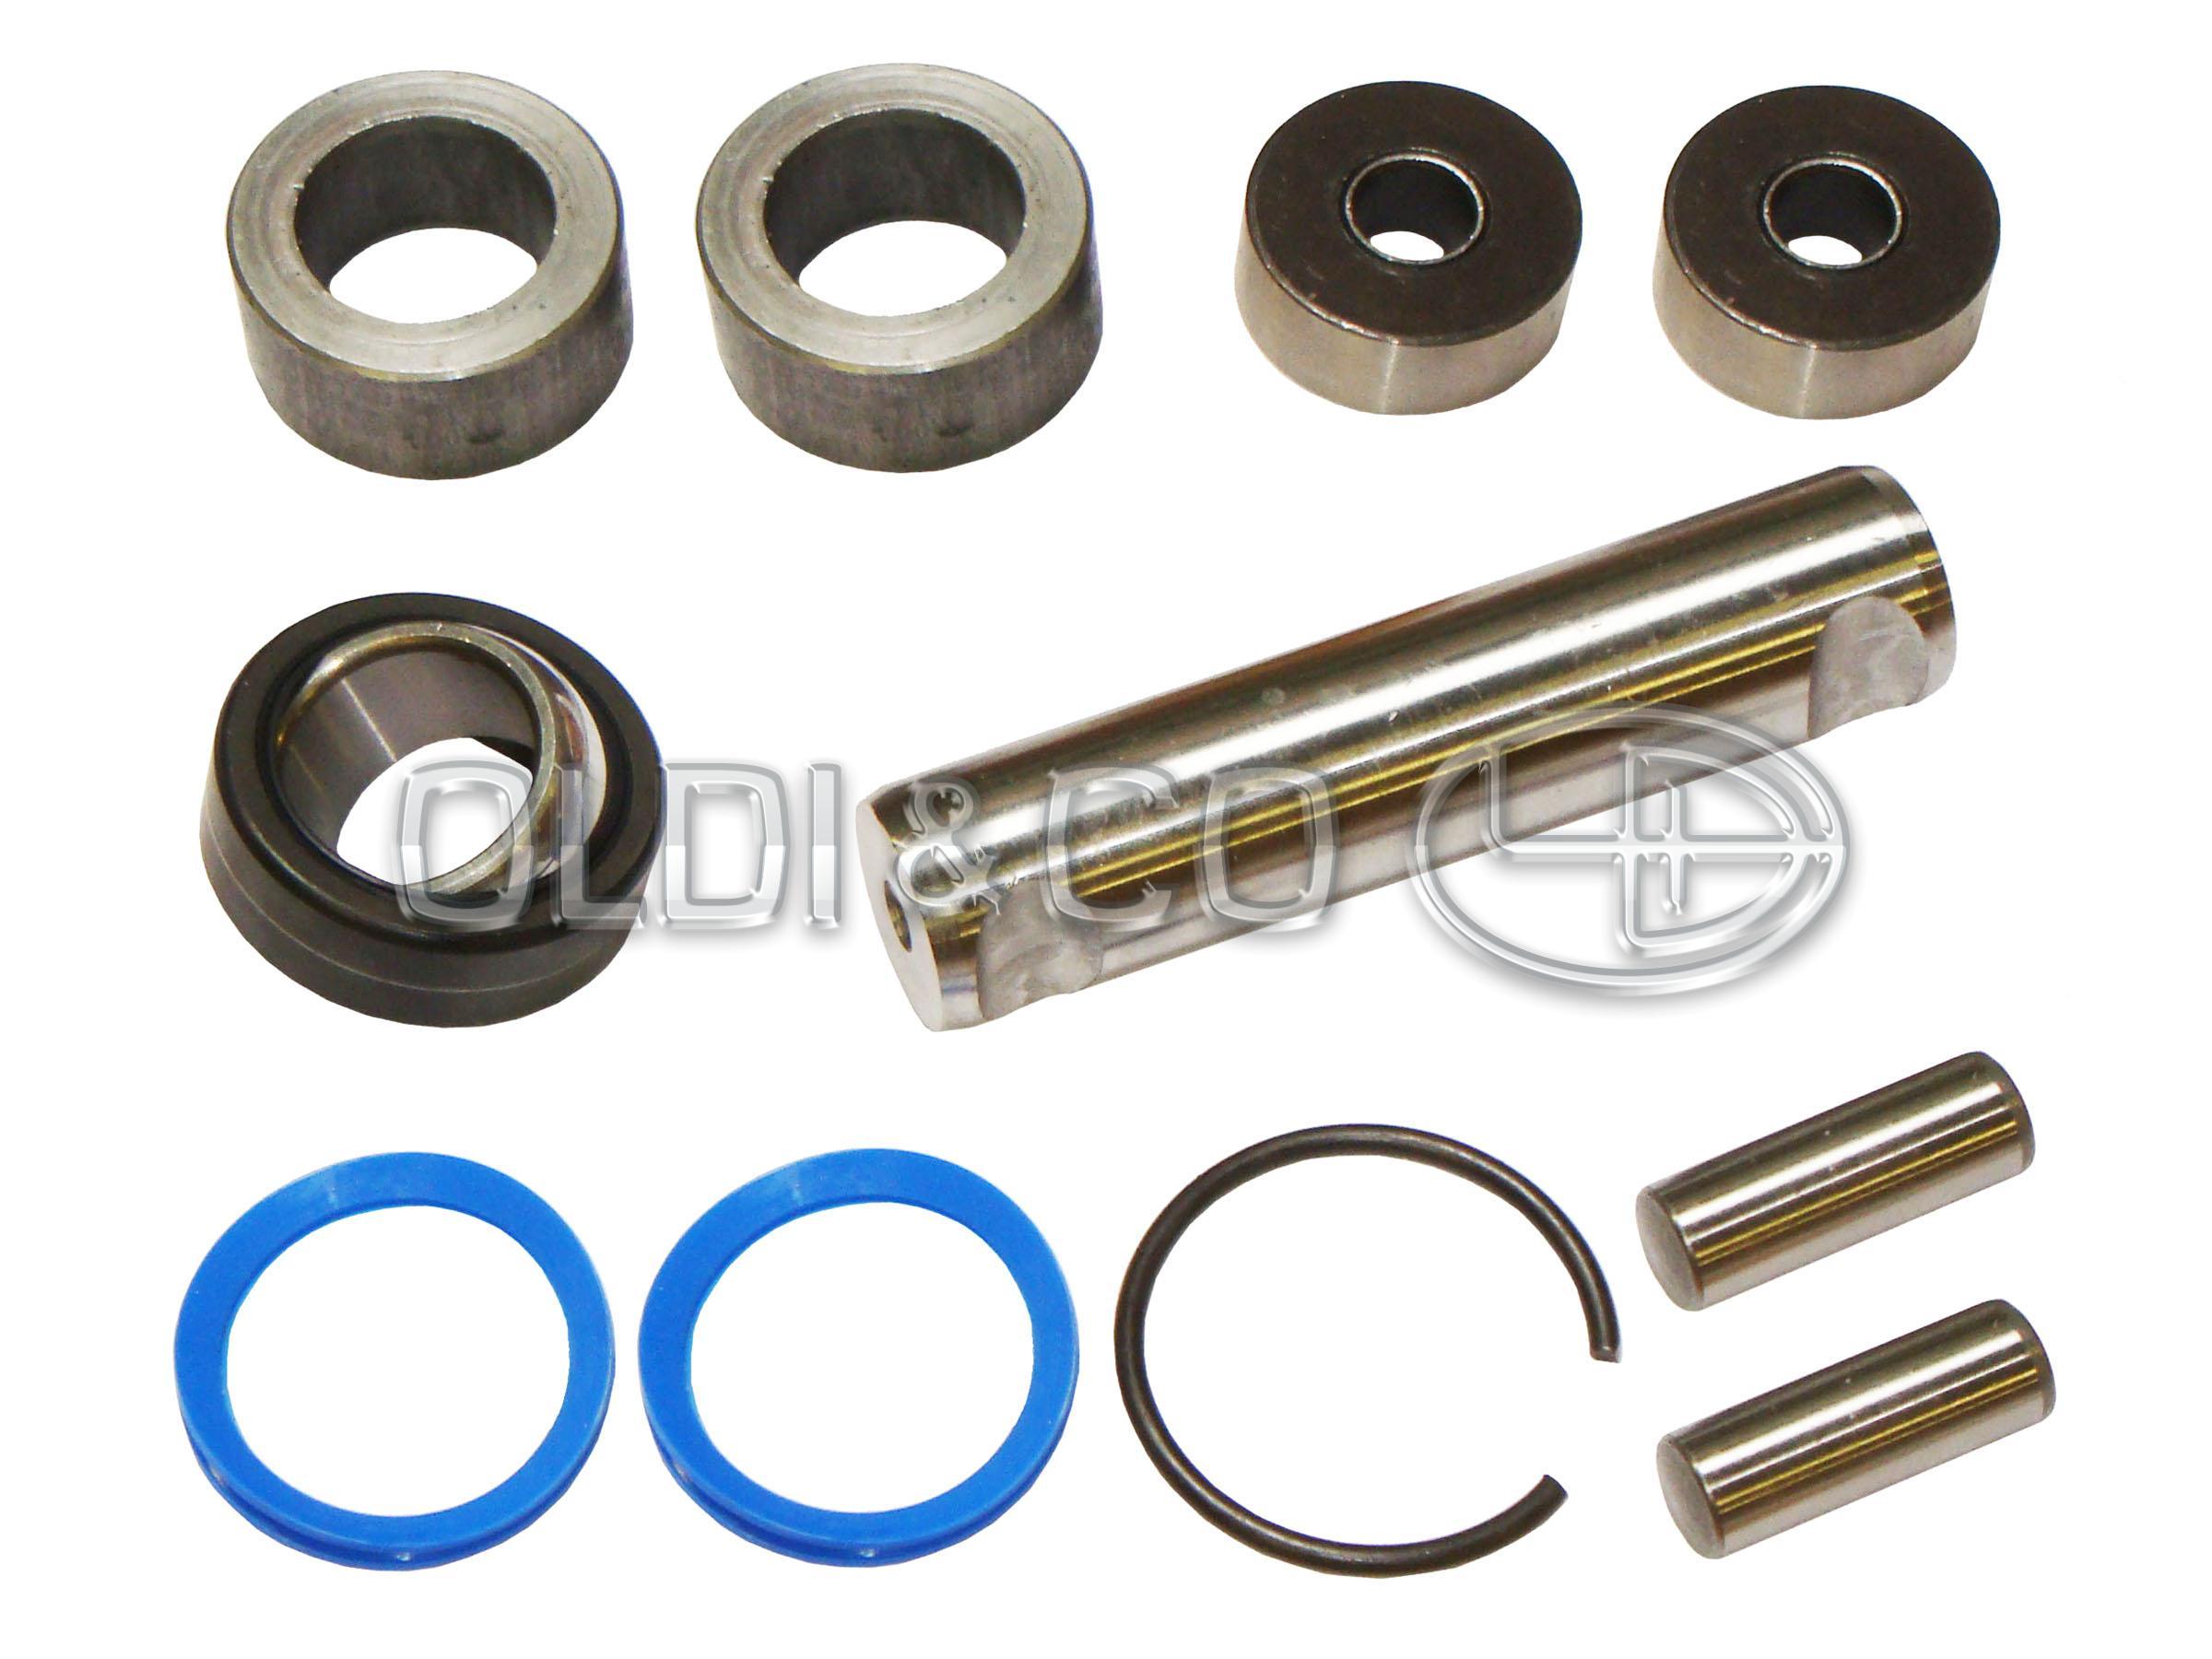 39.018.16901 Clutch system → Release fork repair kit